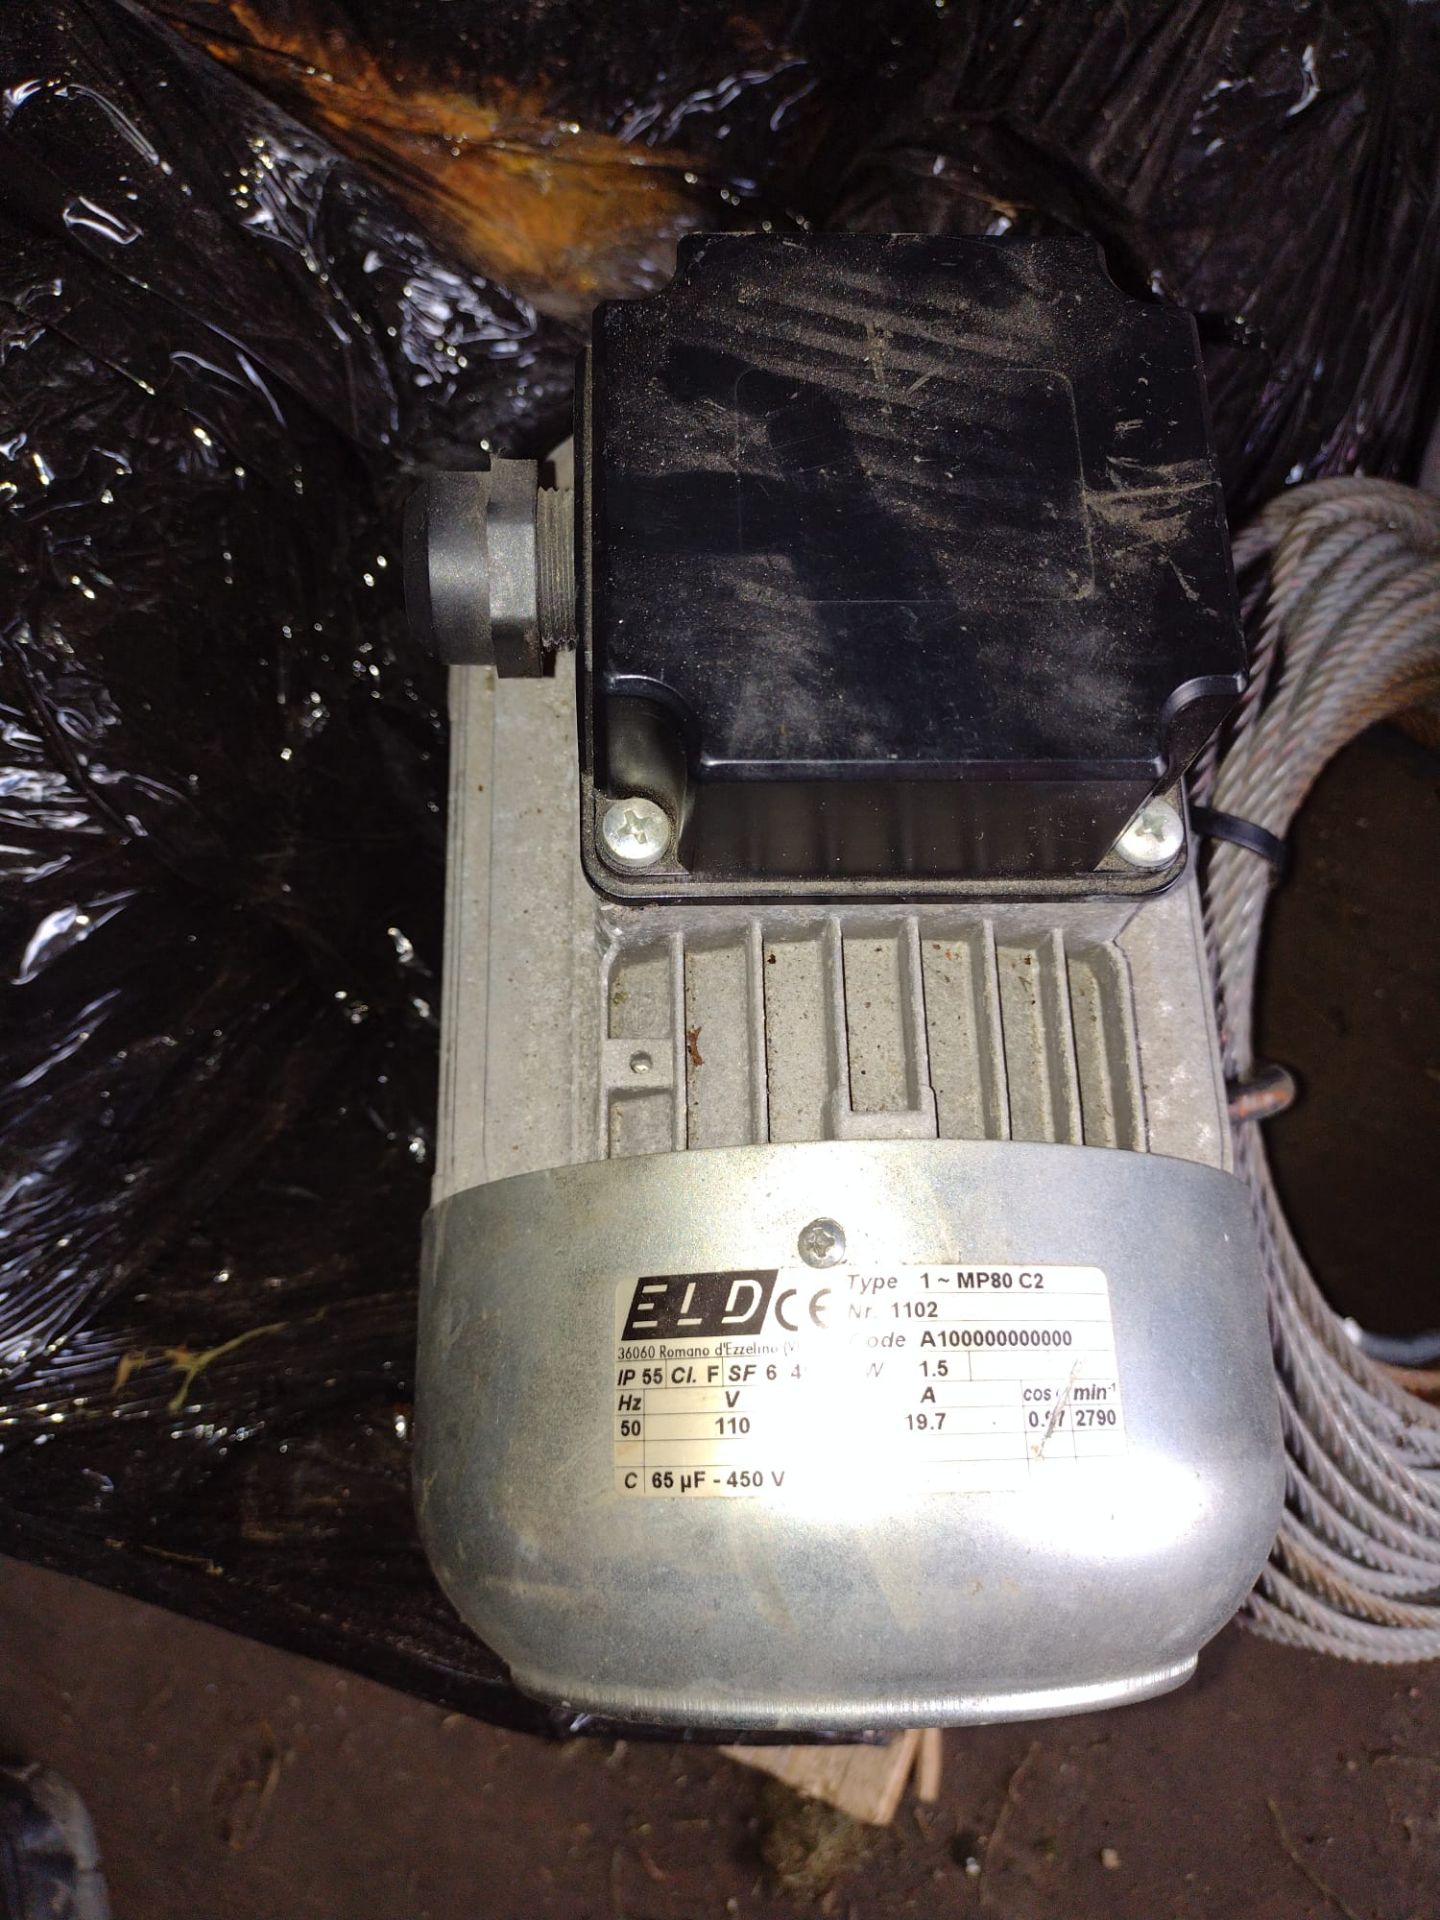 4x 110 motors some immer for scaffolding hoists untested but in good condition 1 or 2 *NO VAT* - Image 9 of 10